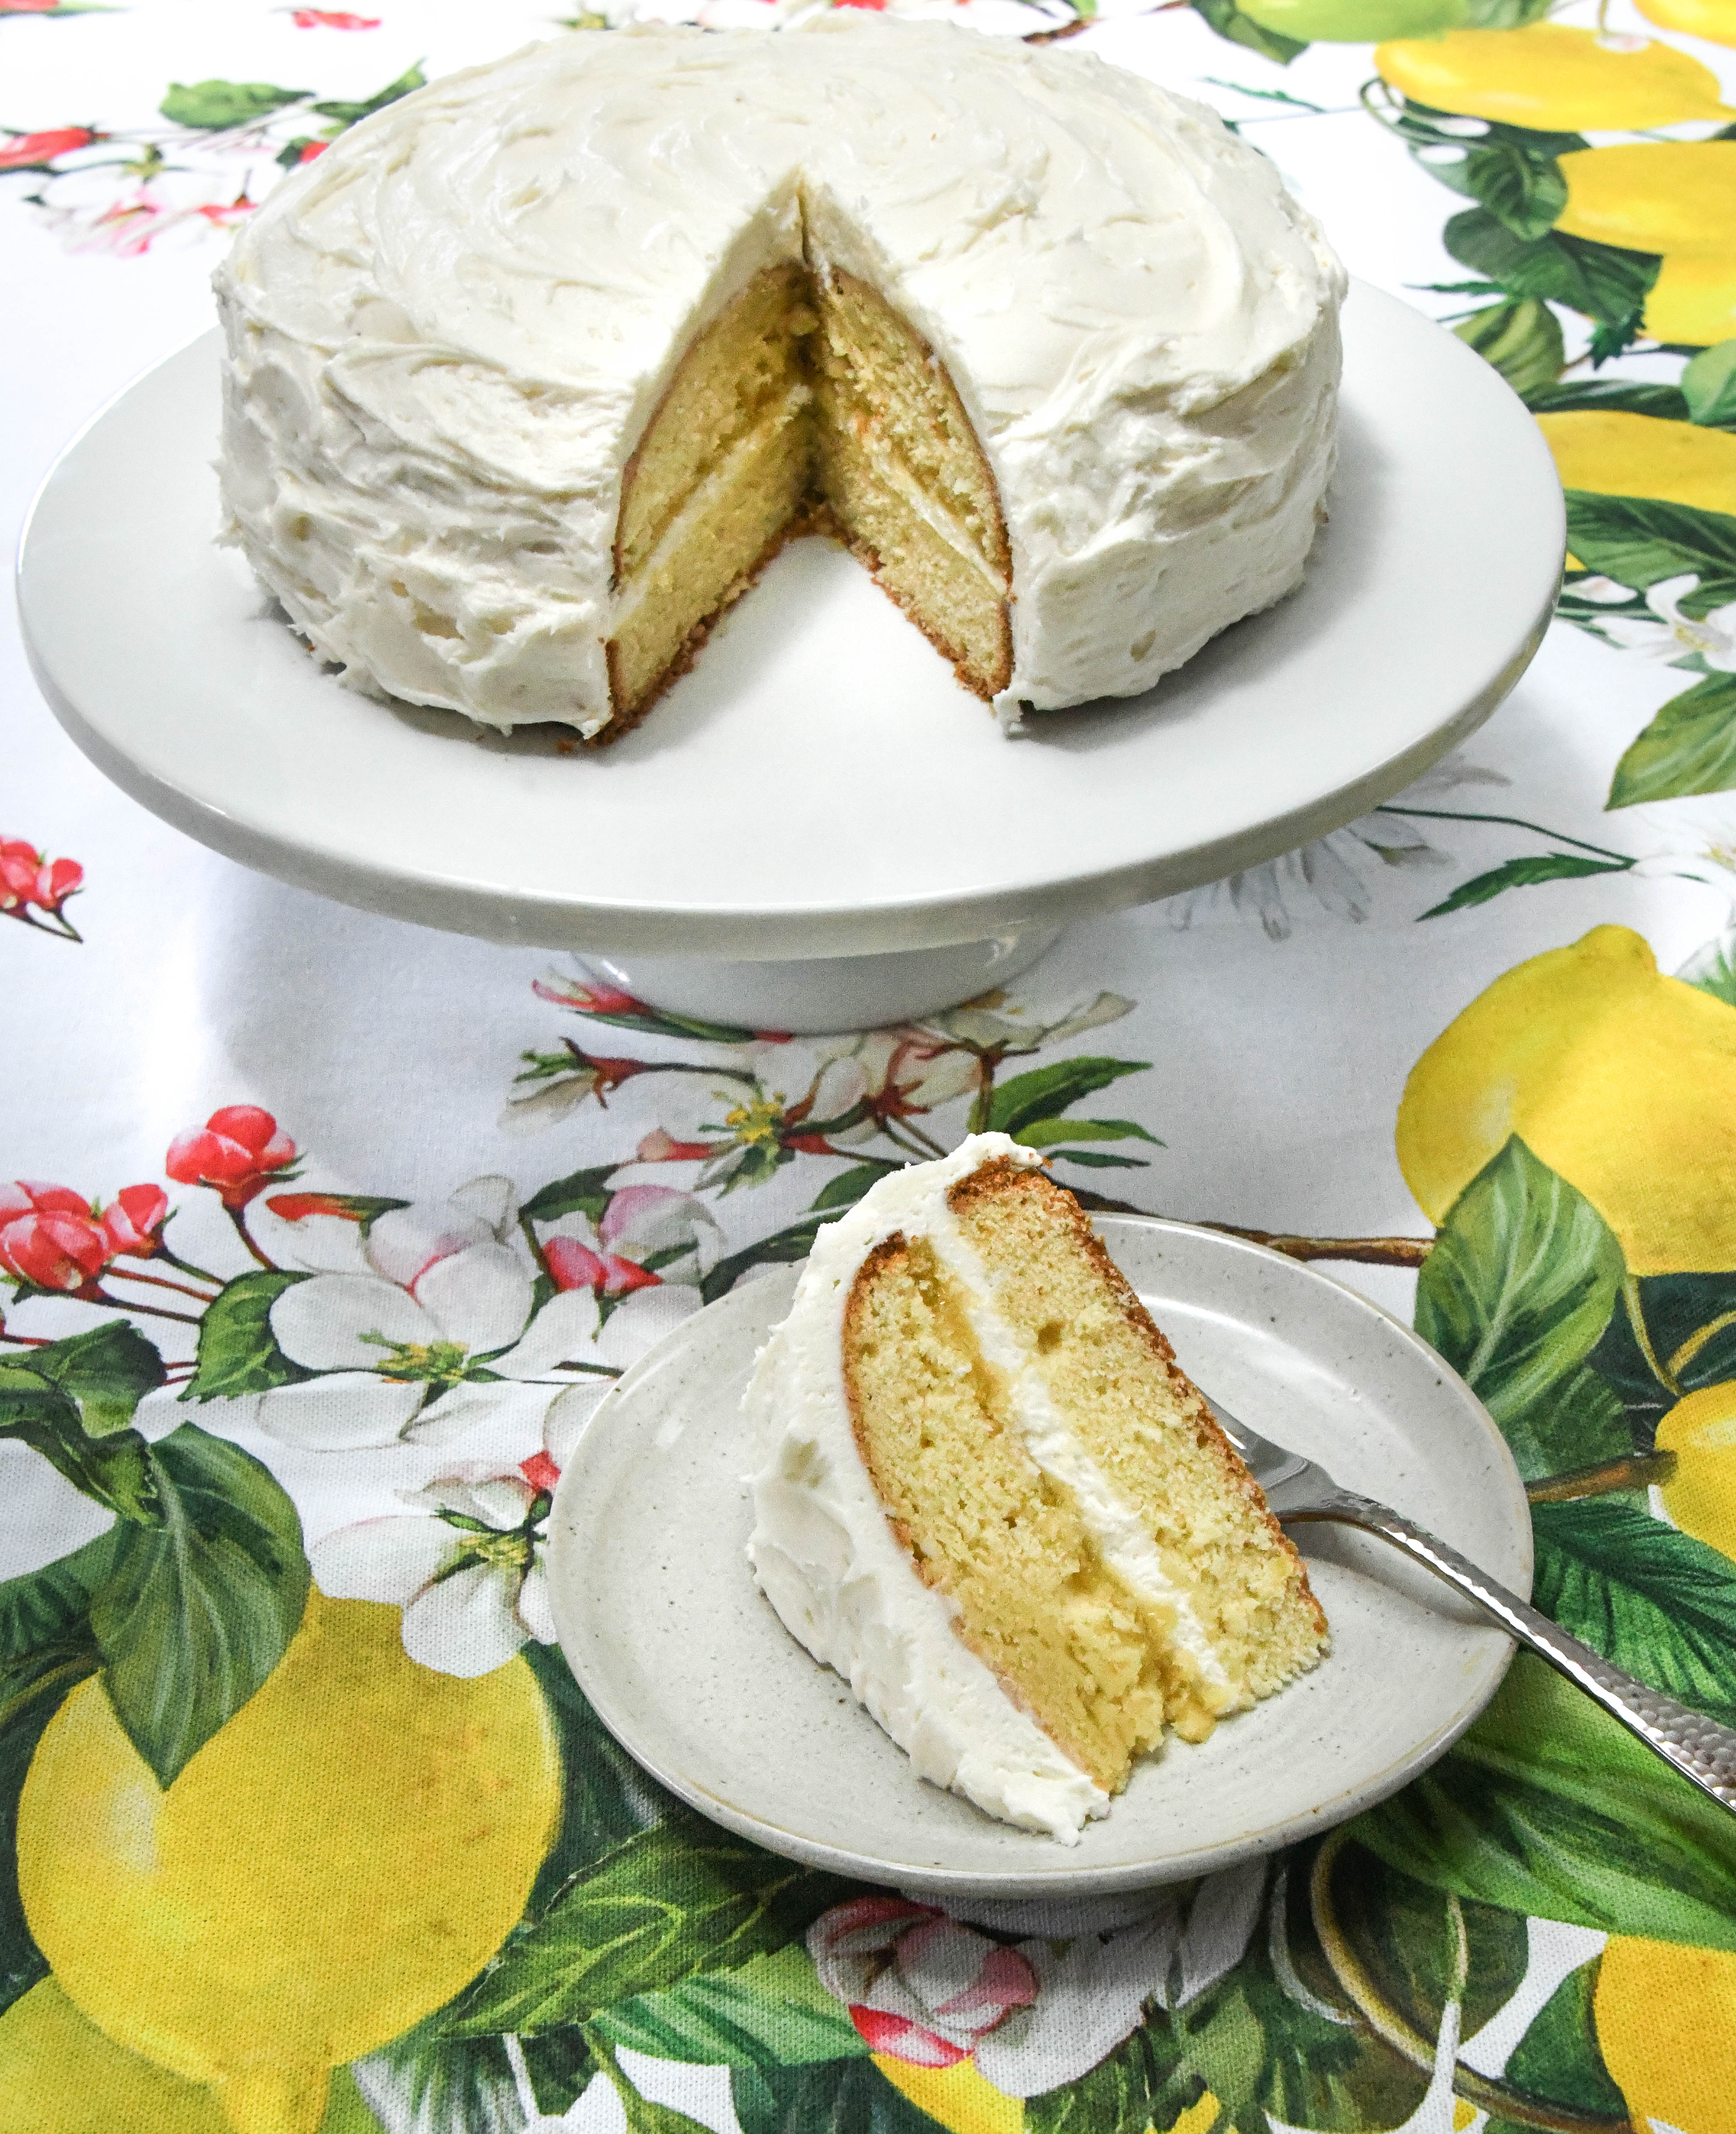 Sliced lemon curd cake on plate and cake stand. Both are on a lemon-decorated tablecloth